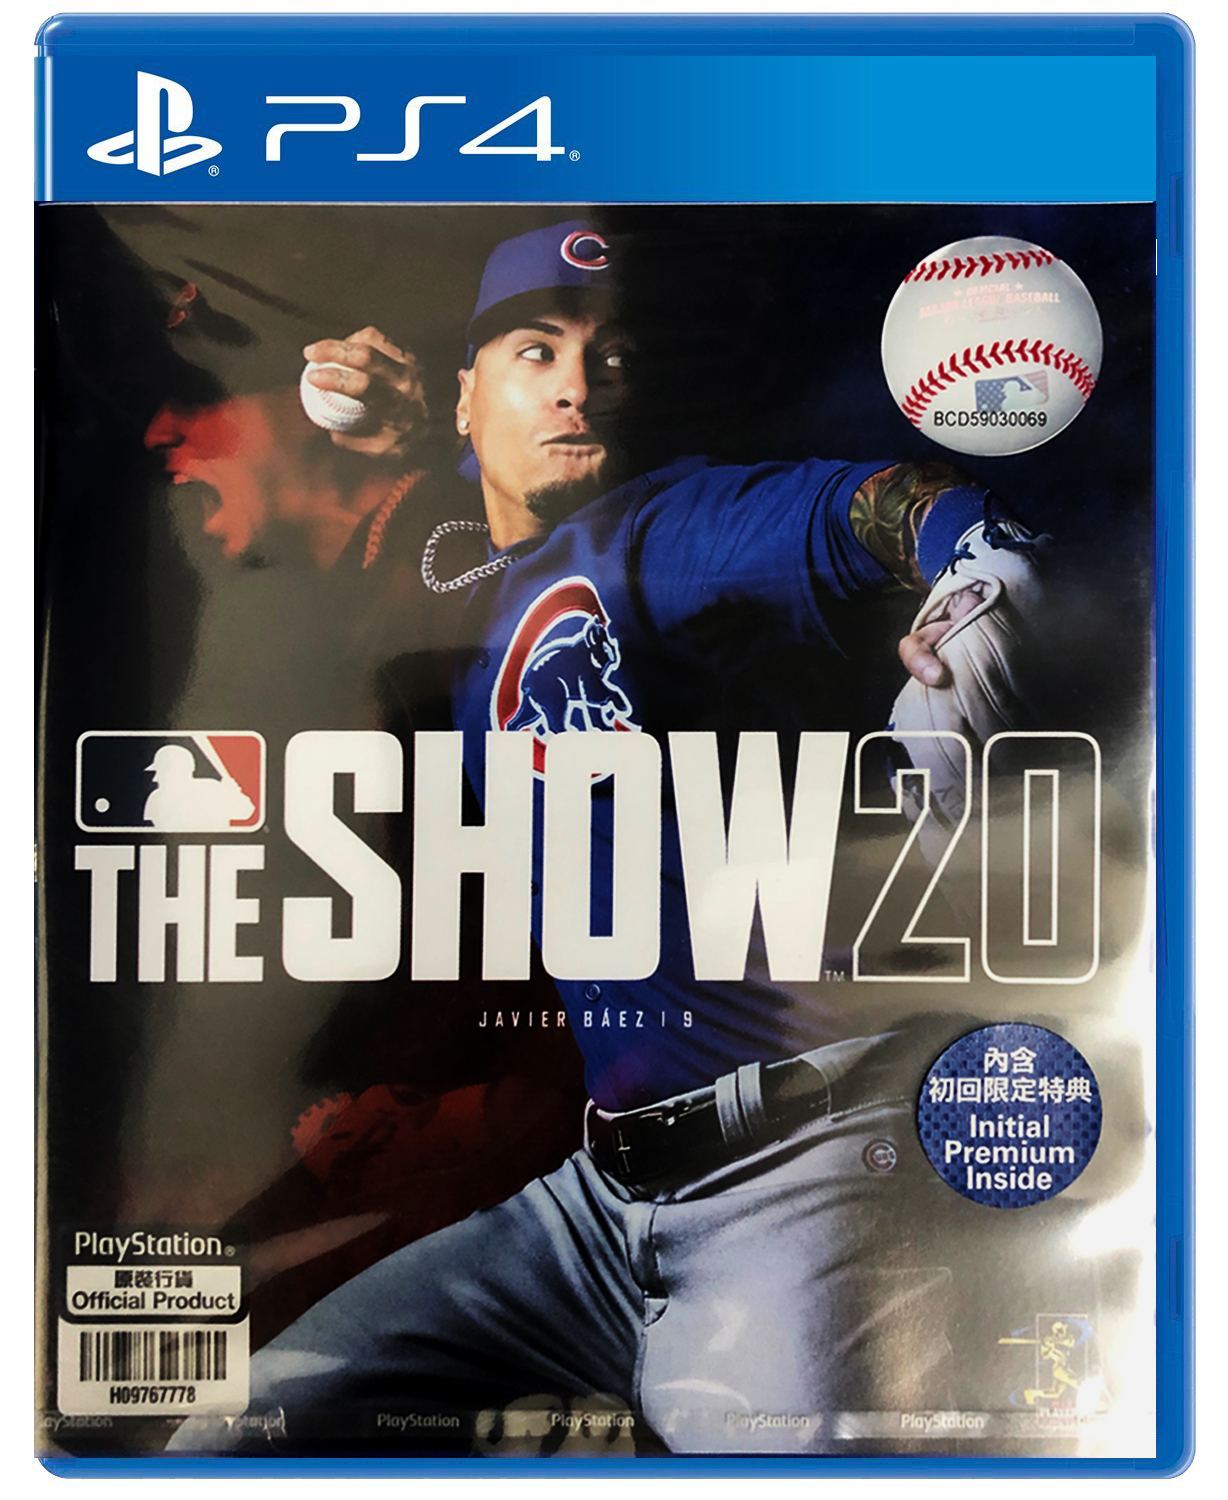 MLB The Show 20 (English) for PlayStation 4